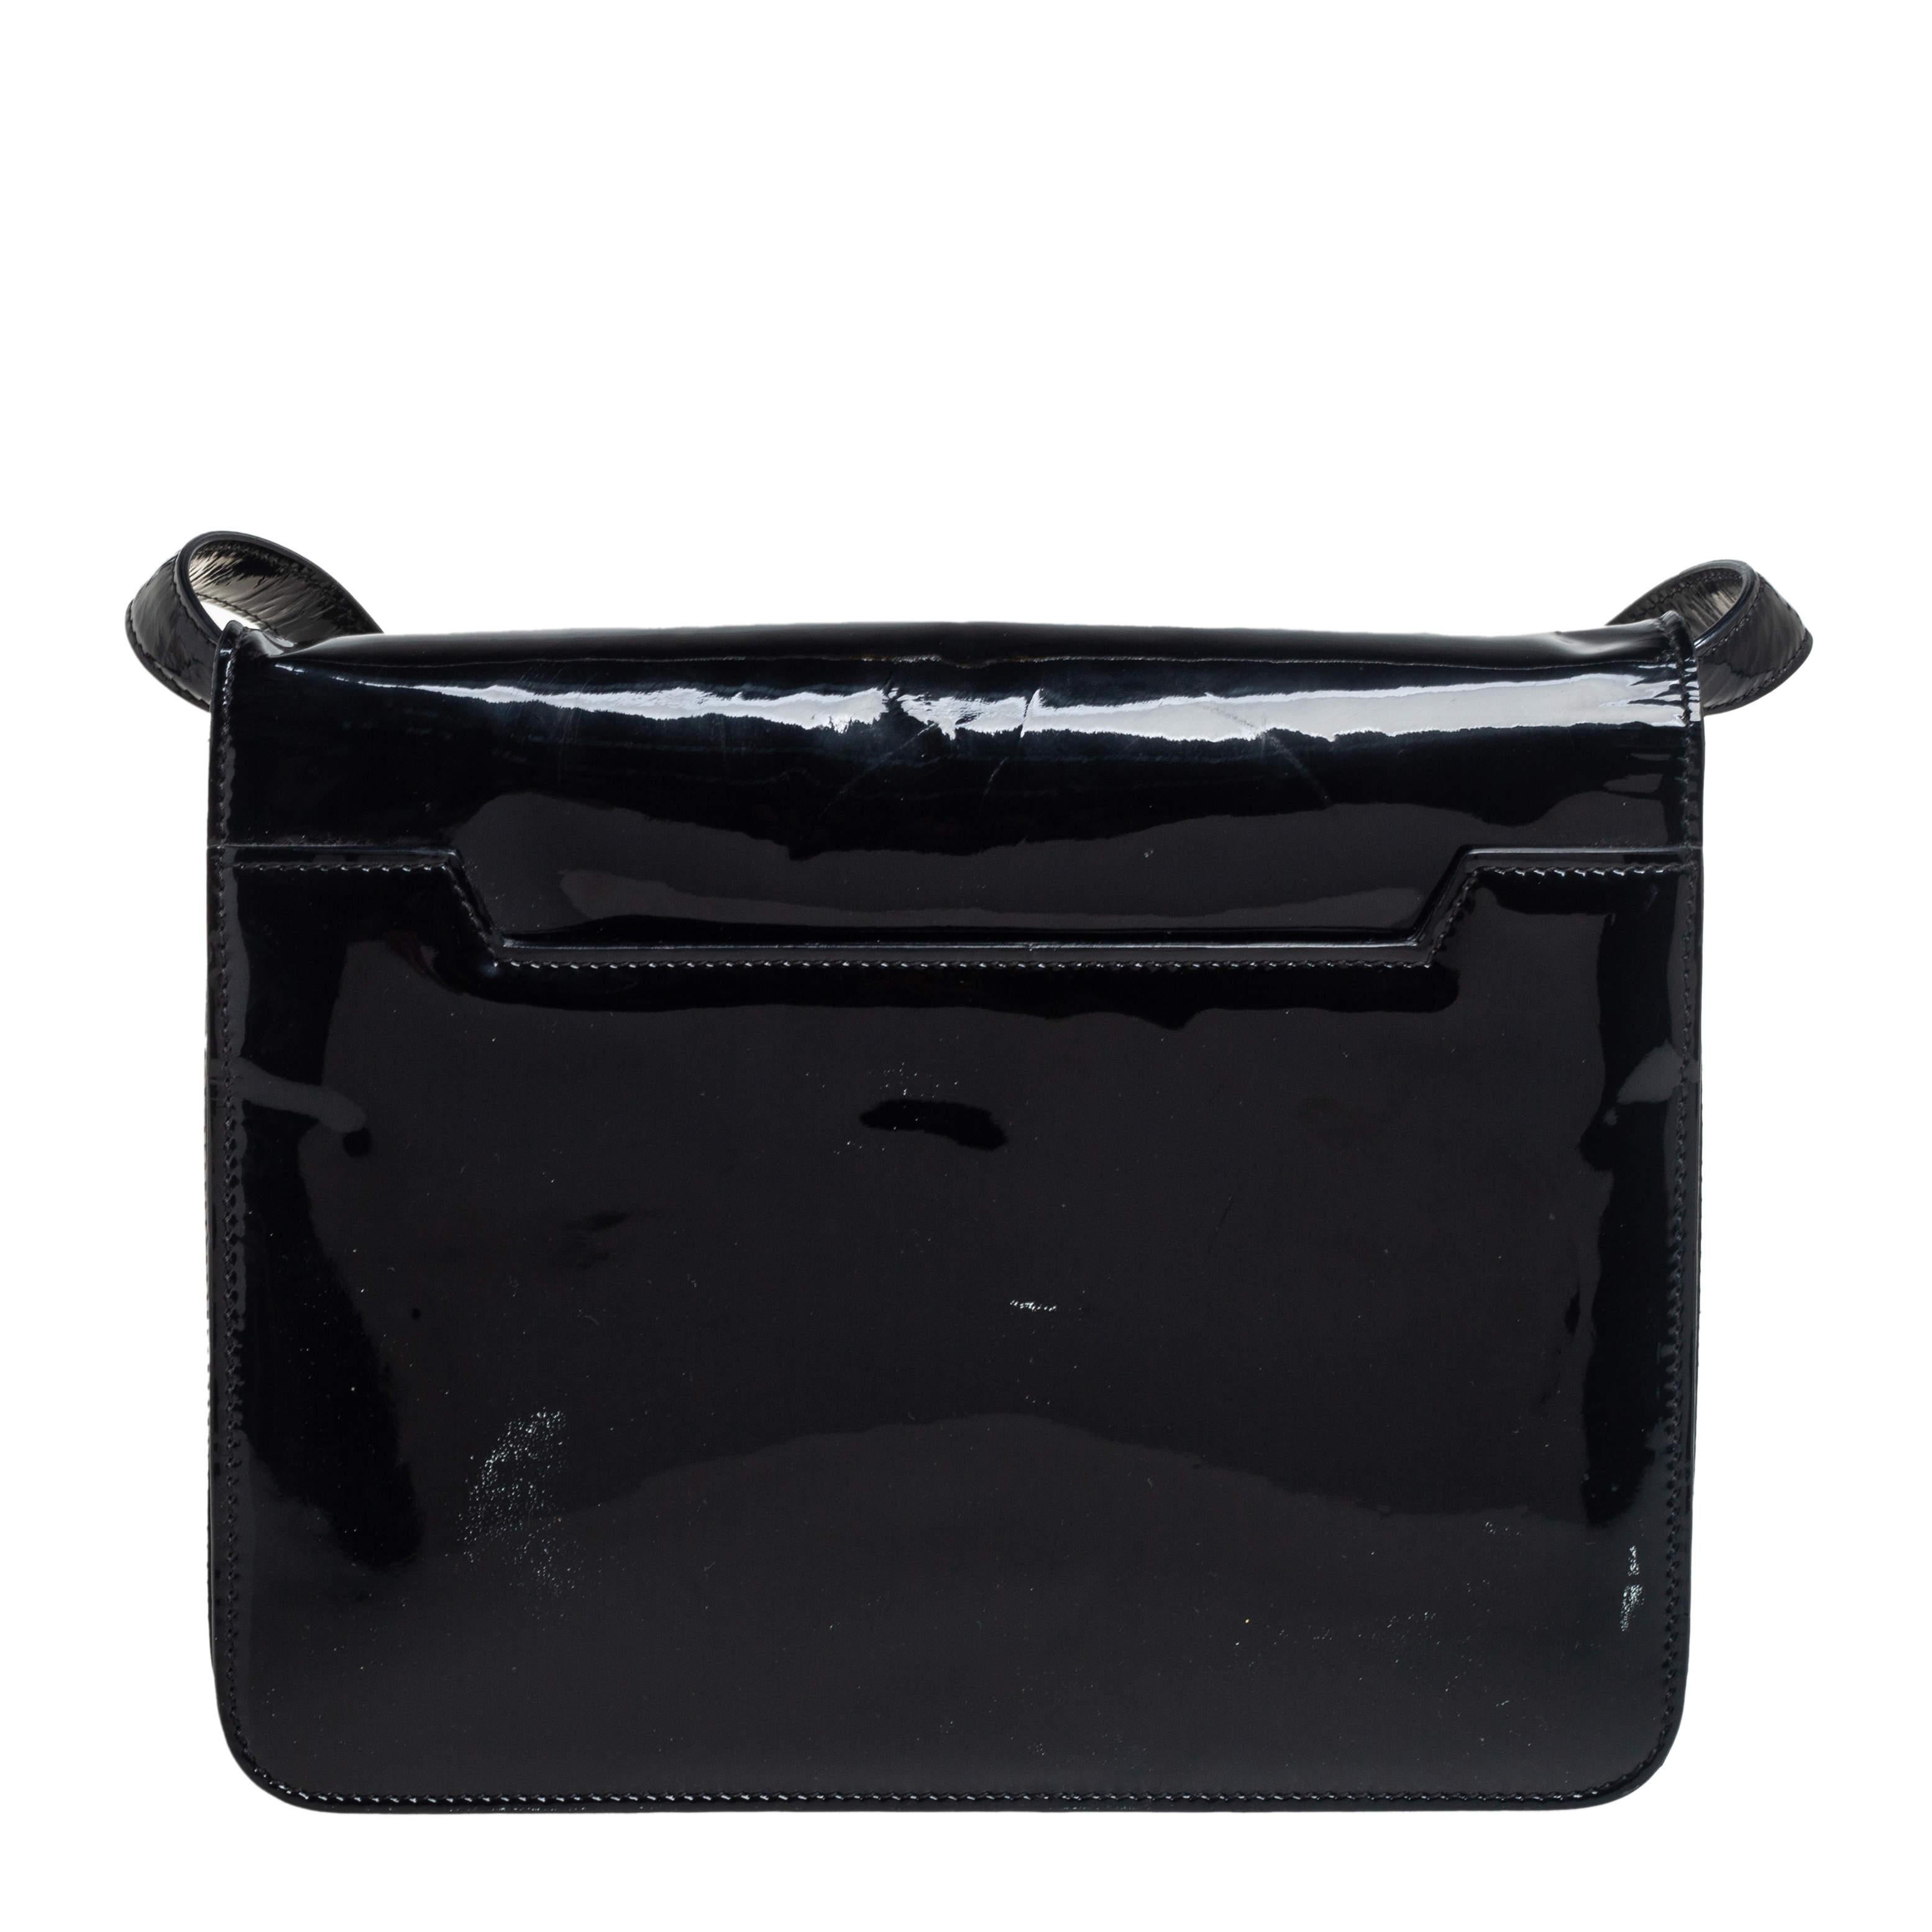 This Natalia bag from Tom Ford is here to end all your fashion woes, as it is striking in appeal and utterly high on style. It has been crafted from patent leather and designed with a flap that has a large turn lock carrying the signature TF